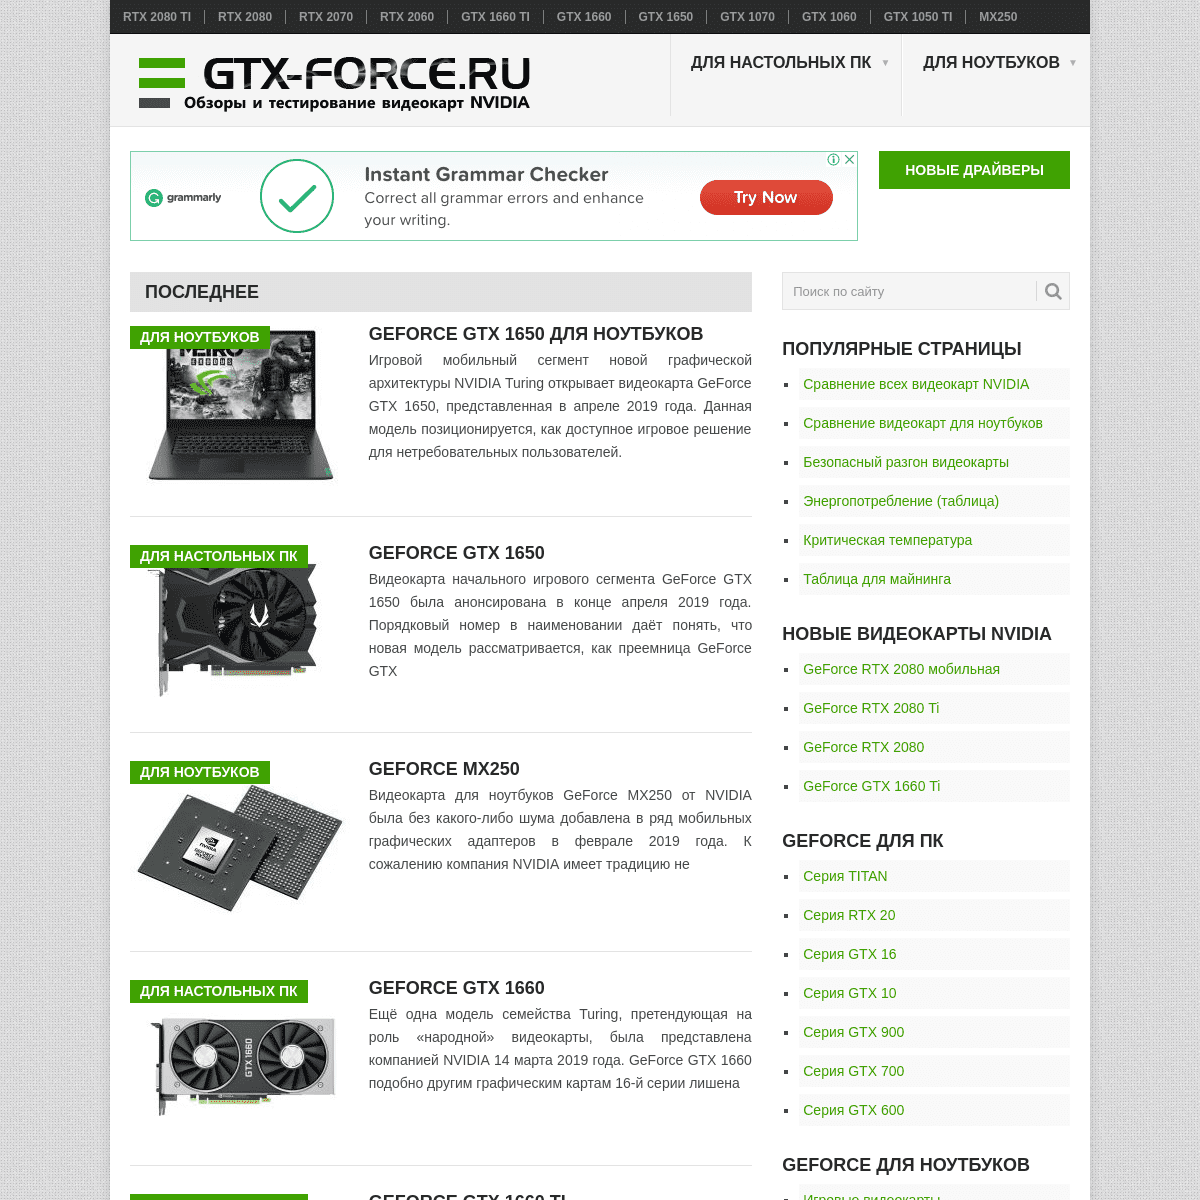 A complete backup of gtx-force.ru